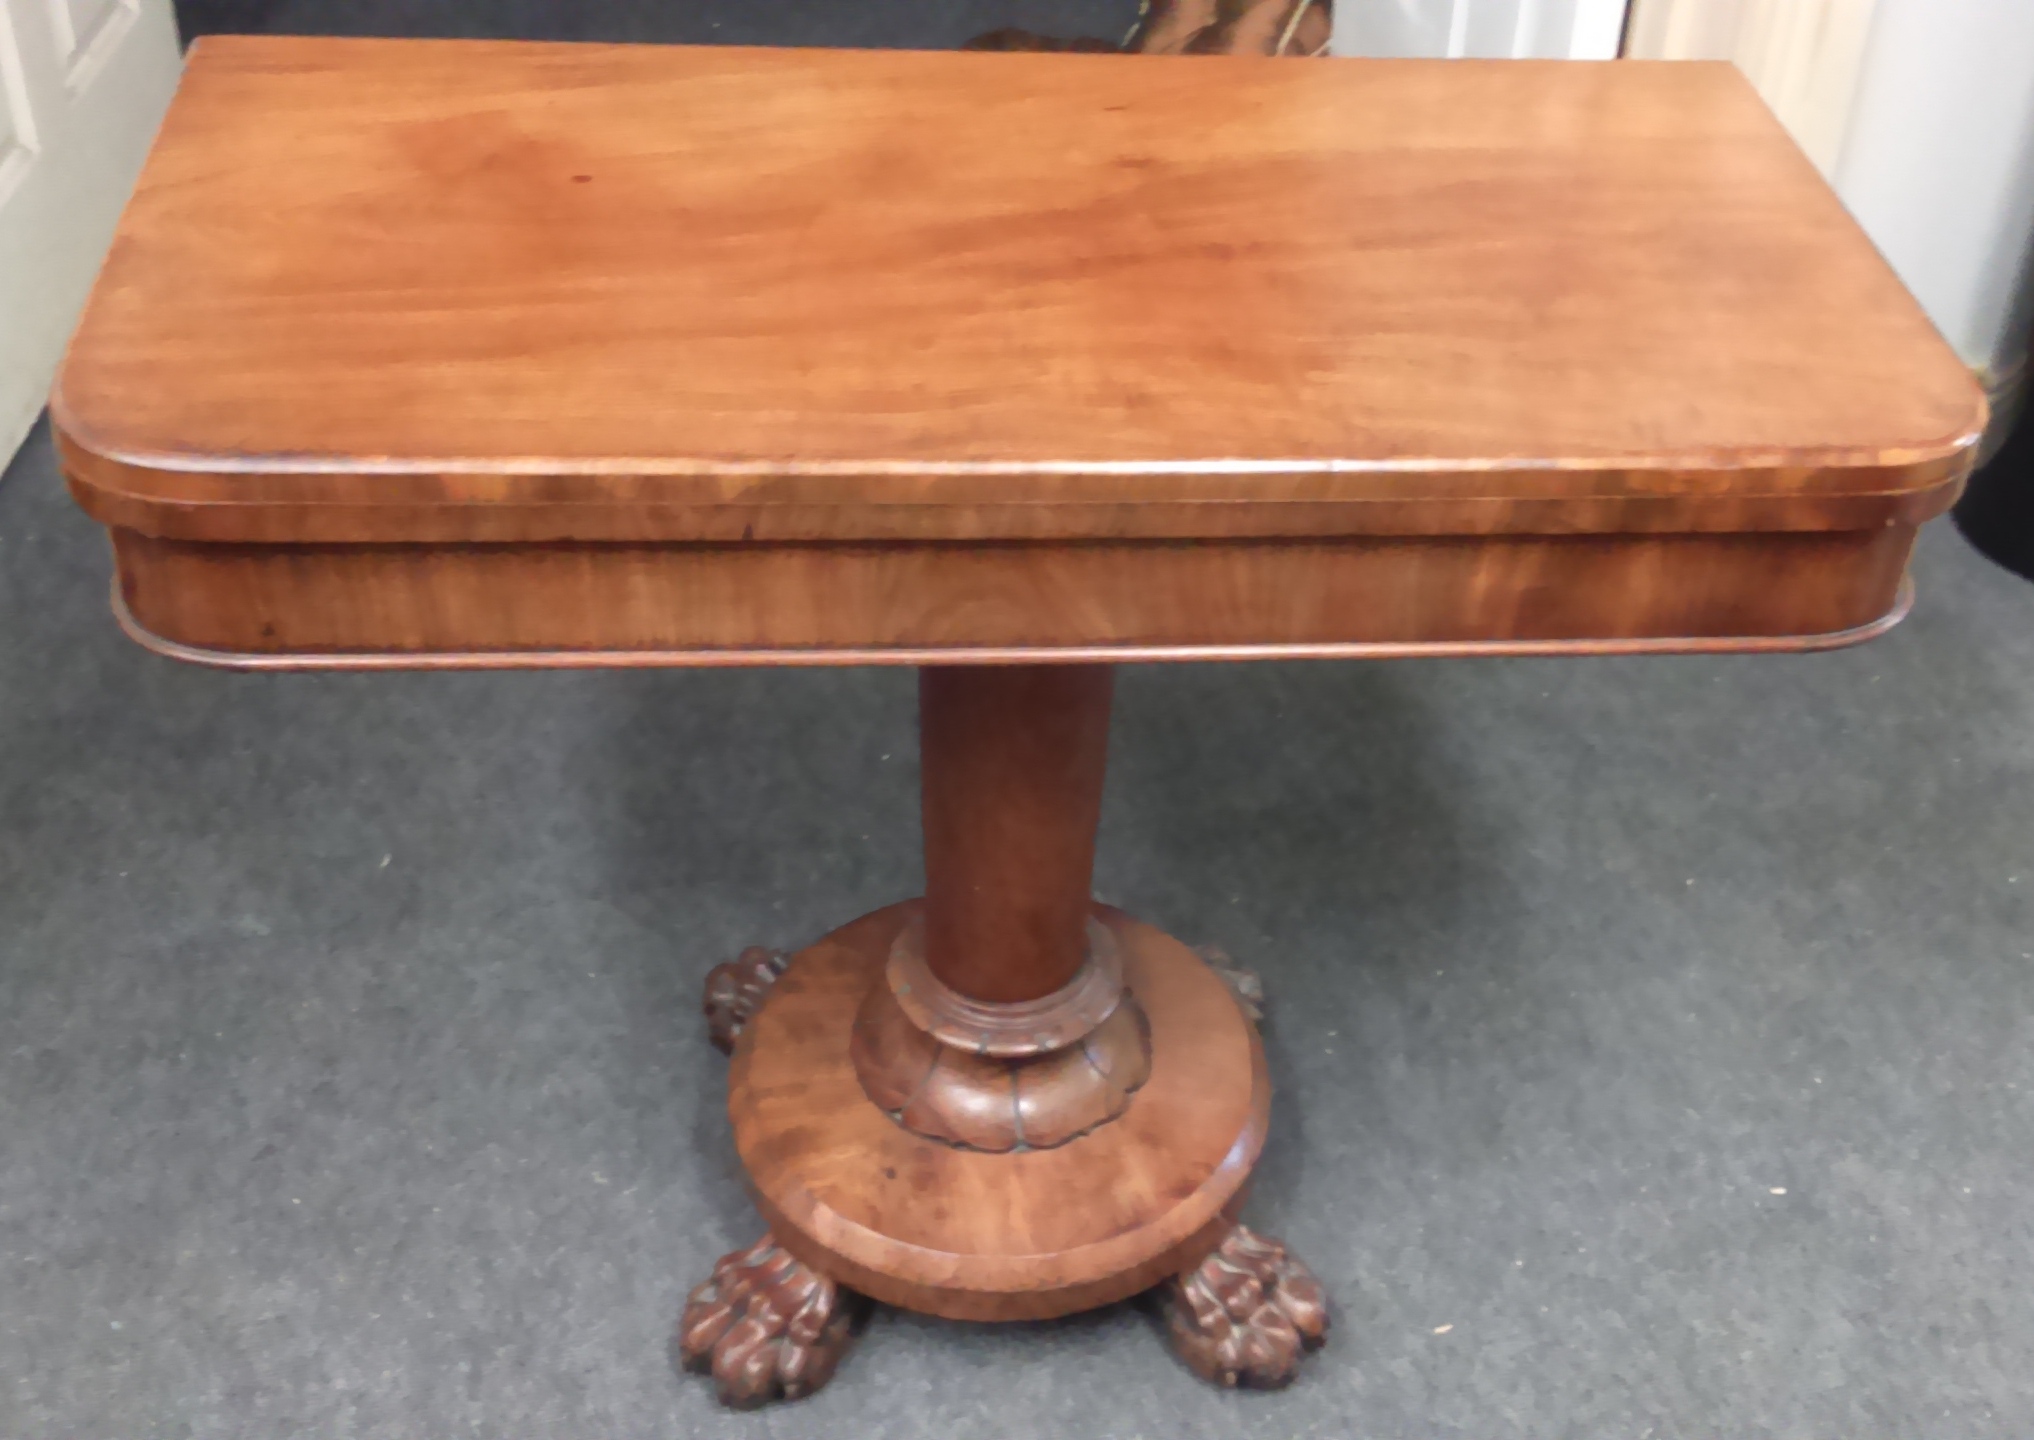 A REGENCY IRISH MAHOGANY CARD TABLE, WITH D-SHAPED FOLD-OVER TOP AND BAIZE LINED INTERIOR, RAISED ON